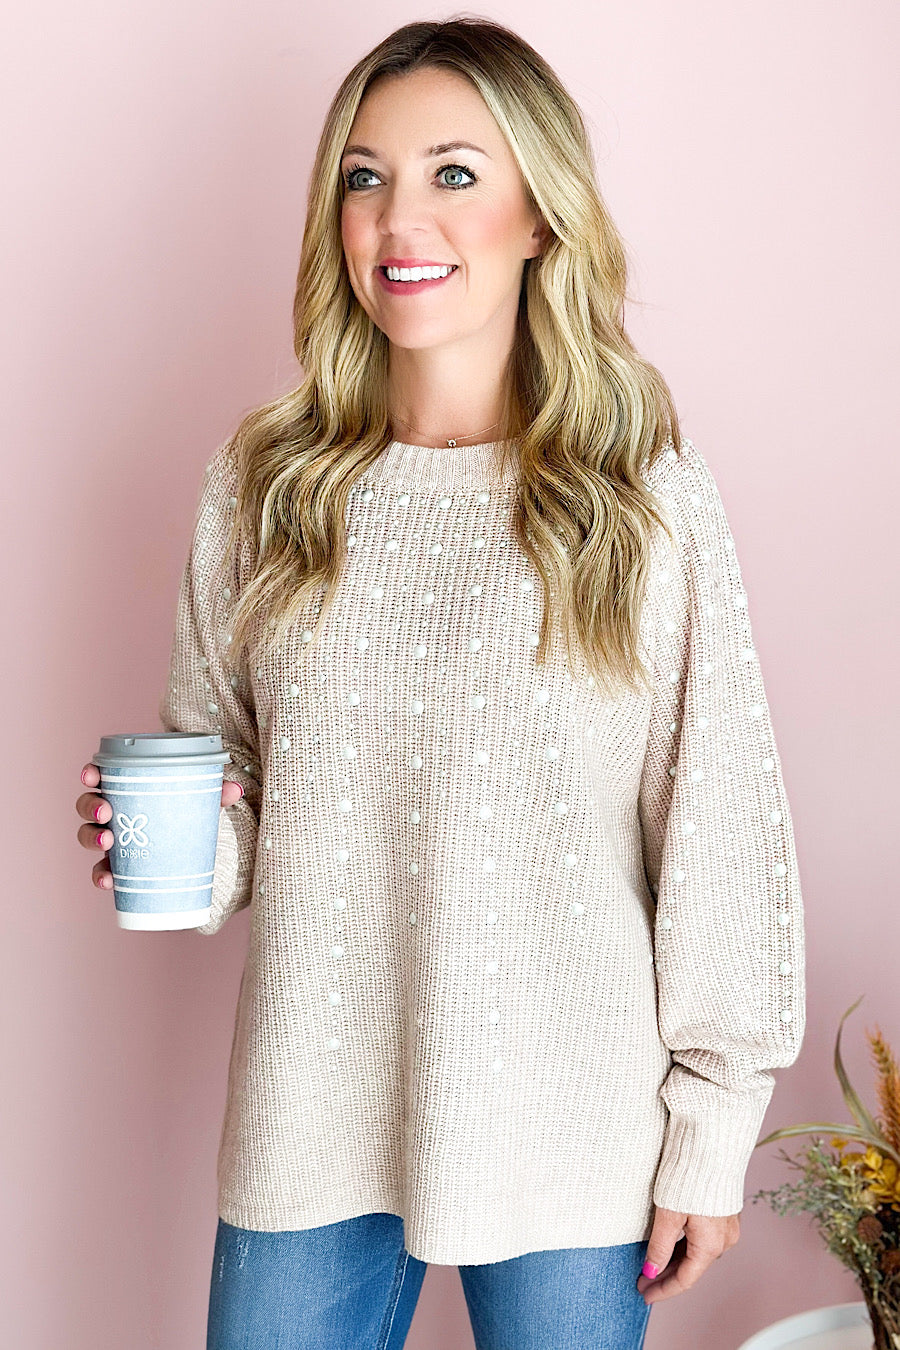 The Pearl Studded Sweater